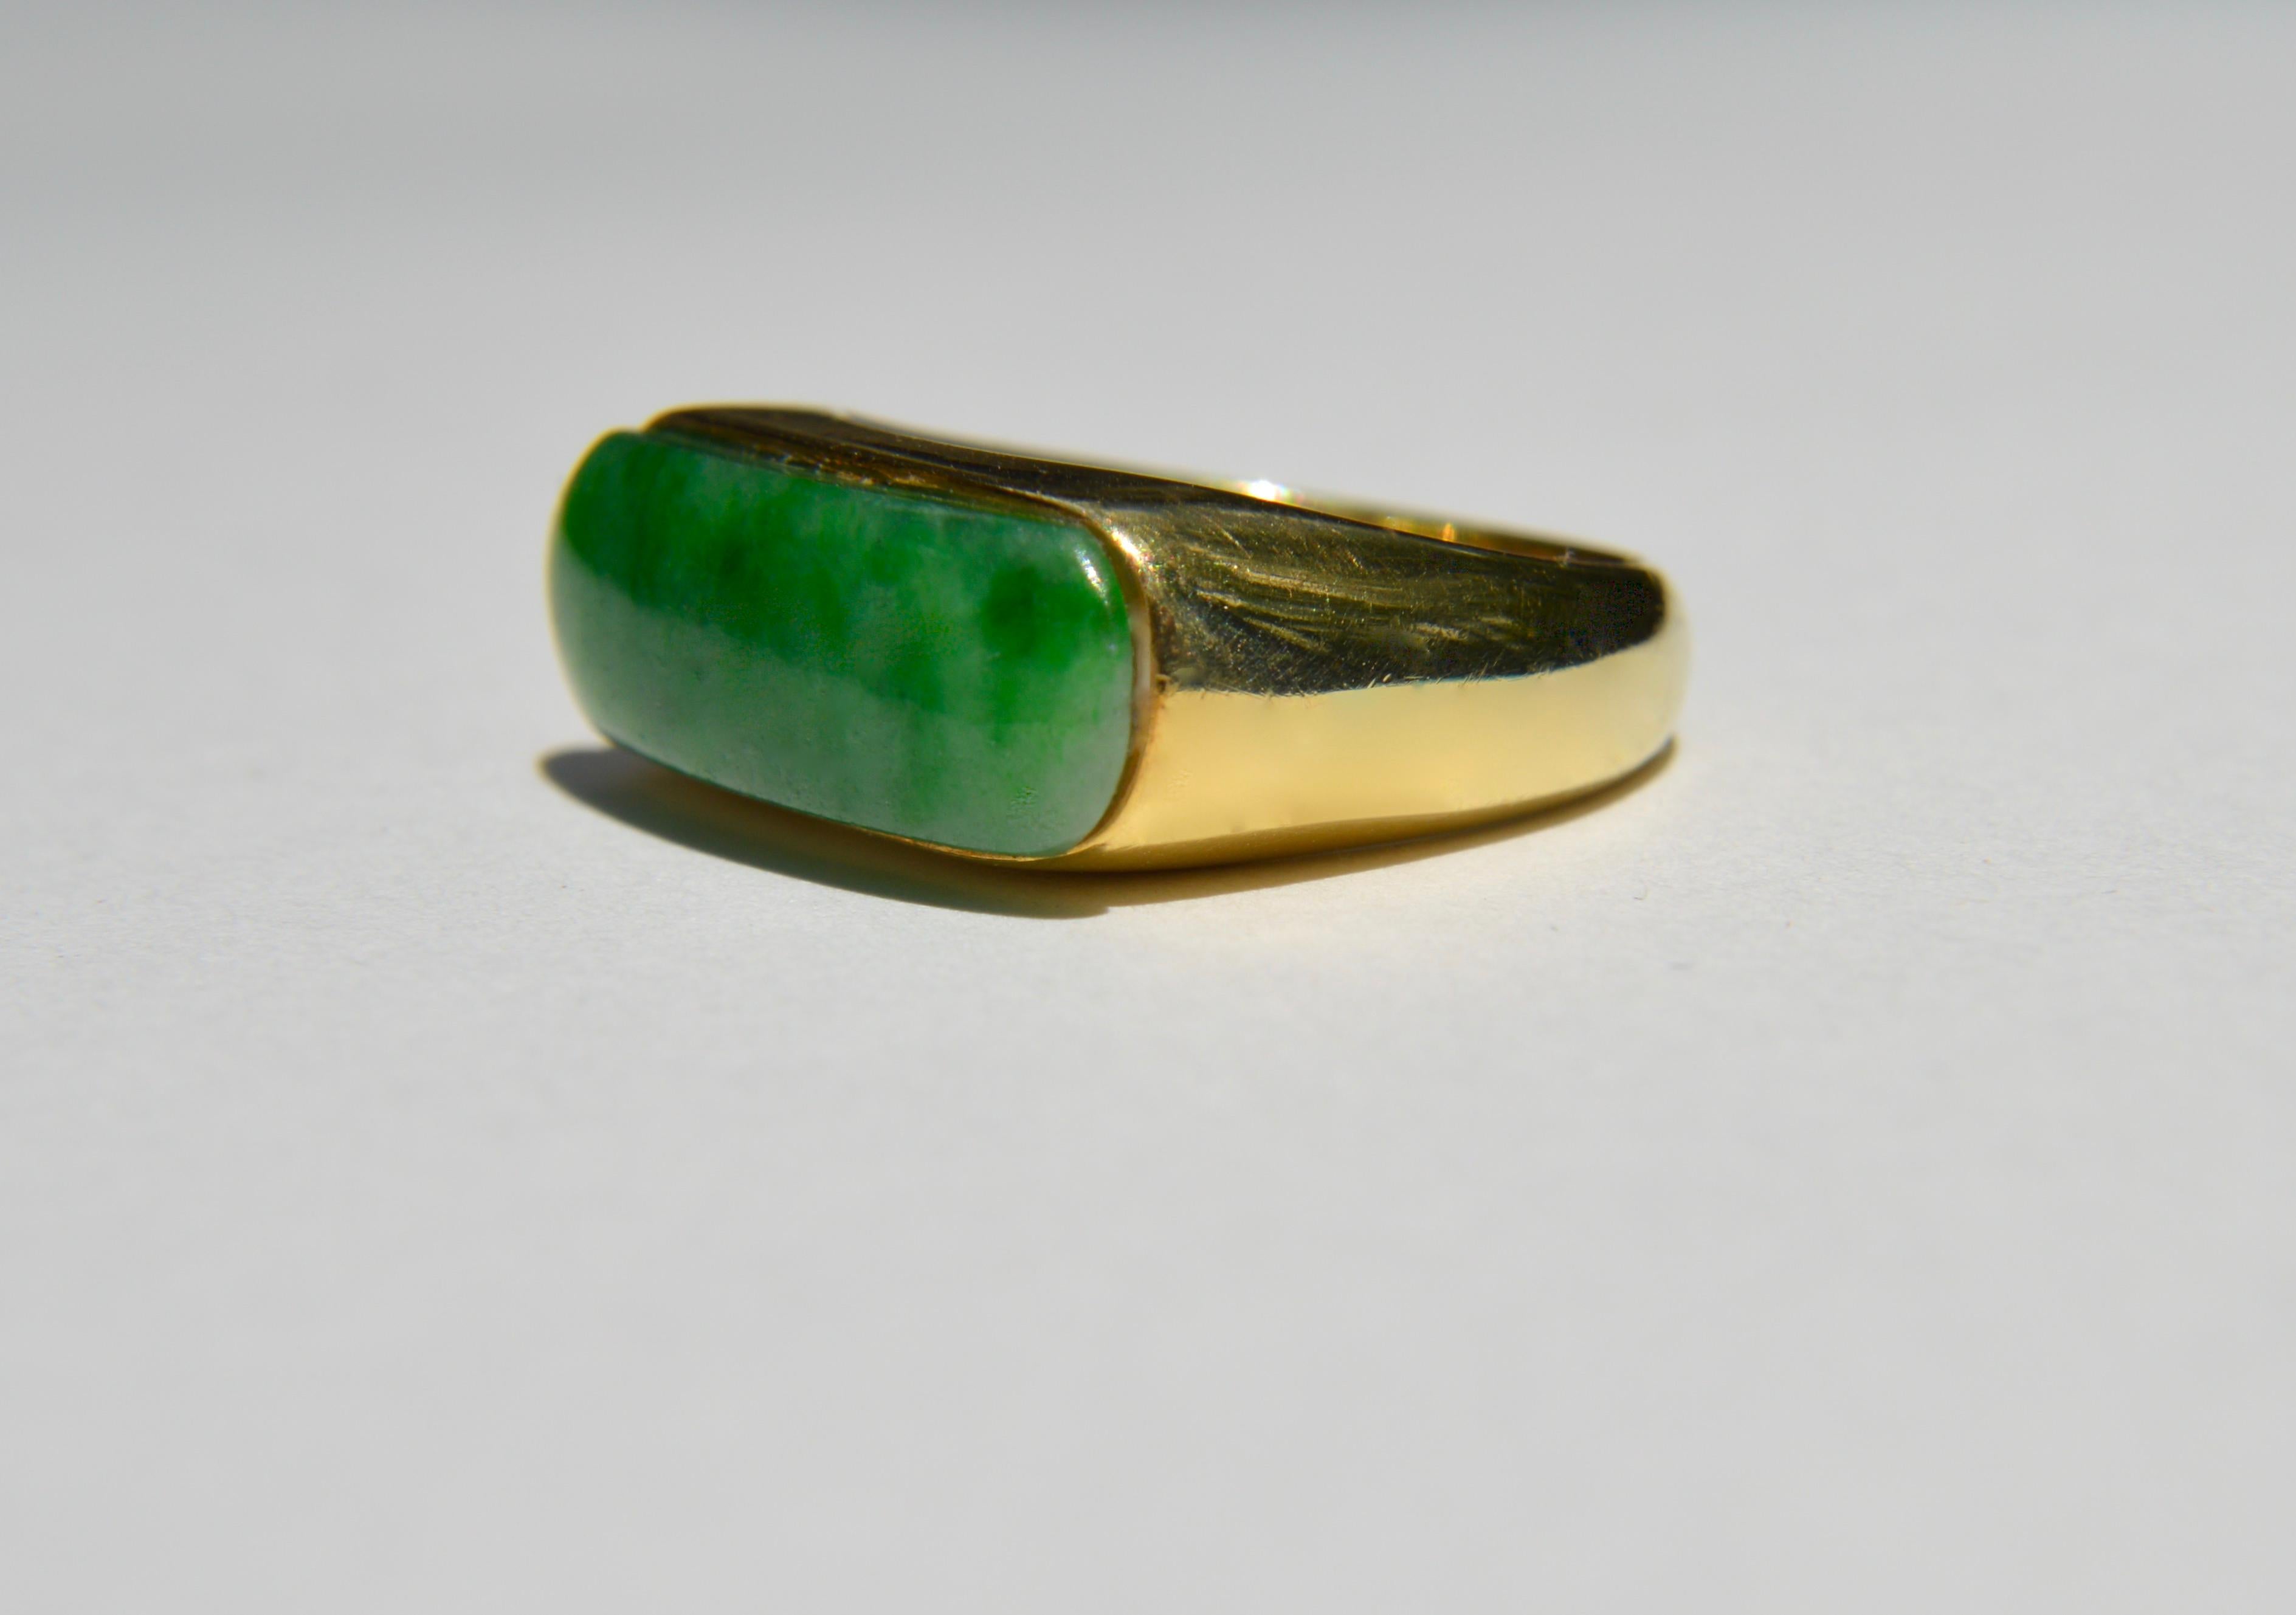 Beautiful vintage Midcentury era circa 1960s 14K yellow gold natural jadeite jade saddle east west signet ring. In very good condition. Size 6.25. Jade measures 18x7mm. Ring weighs 5.66 grams. 

All items arrive in a sleek black gift box.

Jade is a